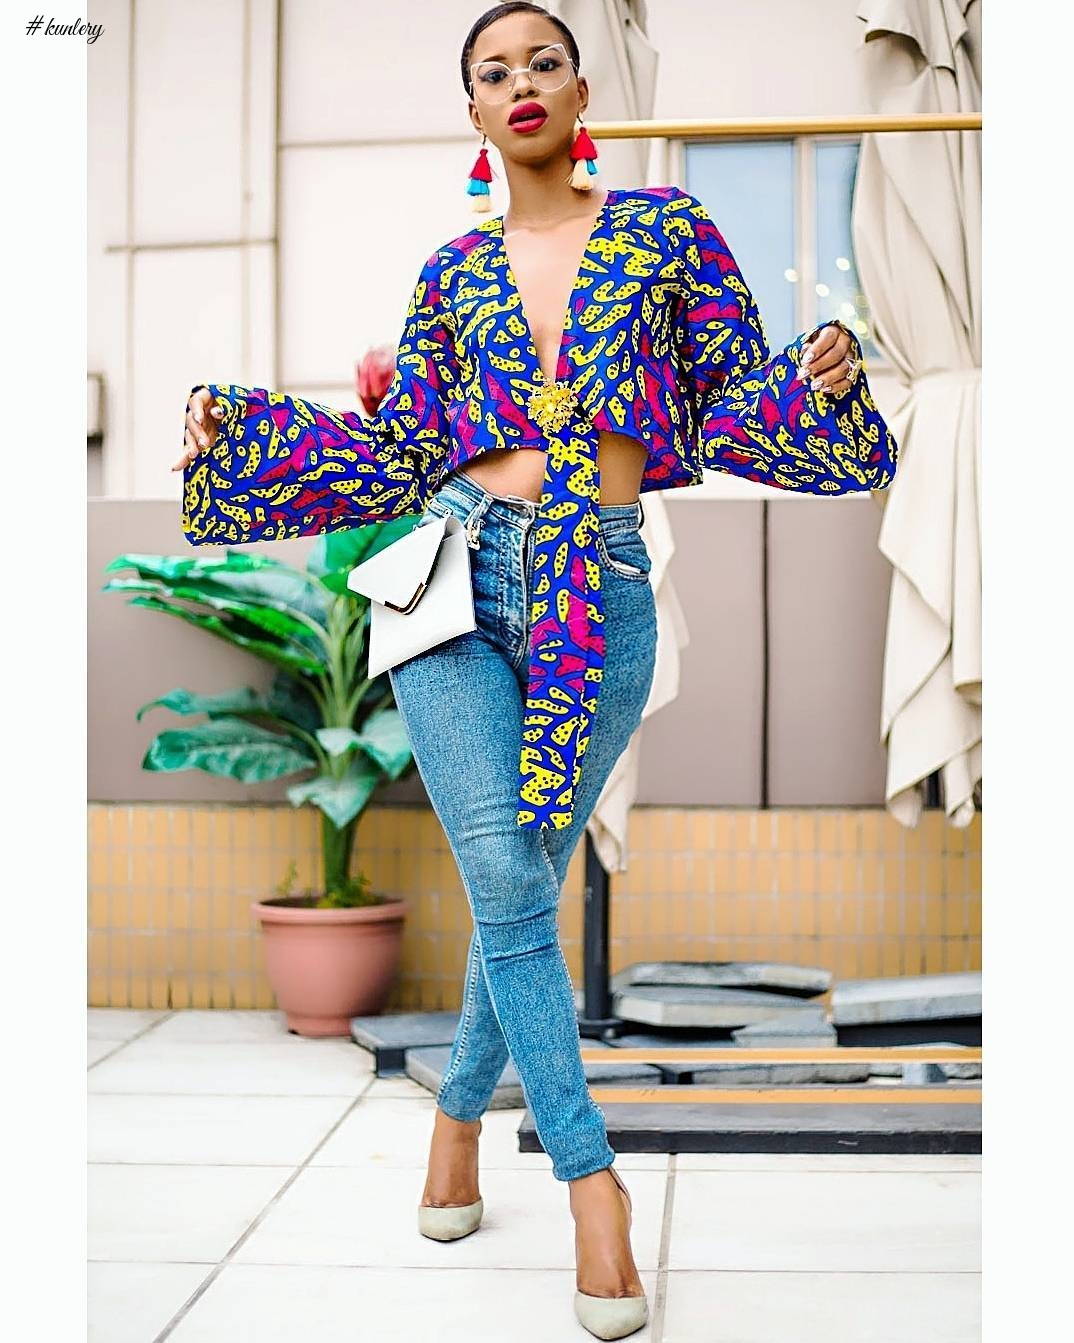 TGIF With The Queen Of Street Style – Angel Obasi Featuring SGTC Clothing!